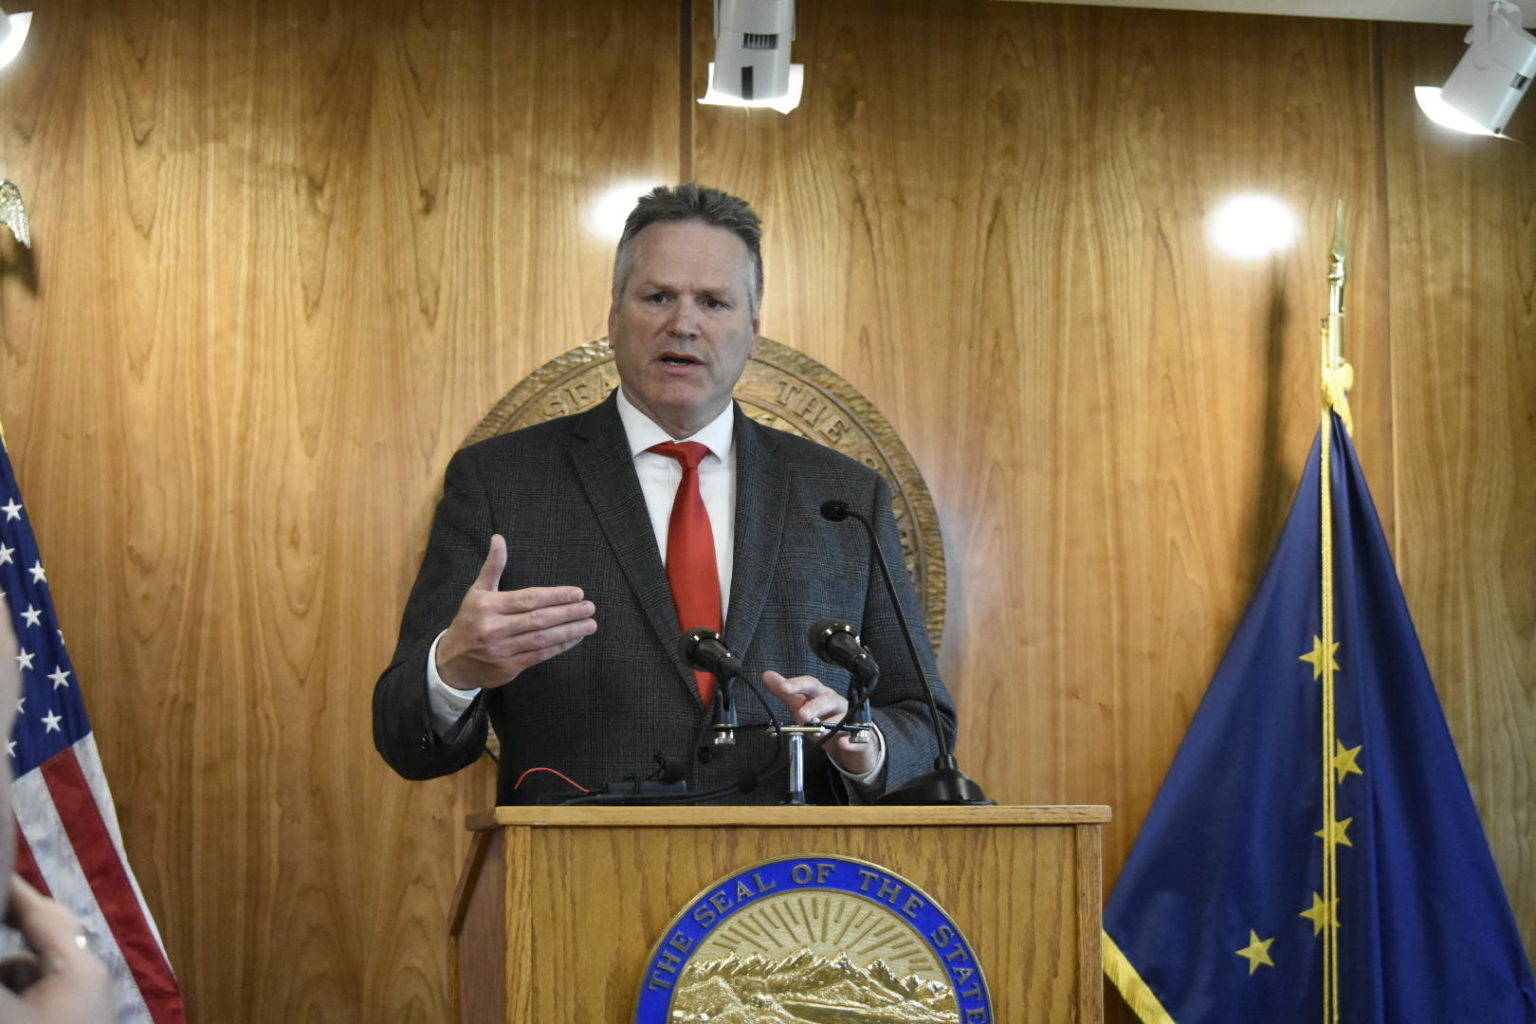 This photo shows Gov. Mike Dunleavy speaking at a July 2020 news conference. (Peter Segall / Juneau Empire File)